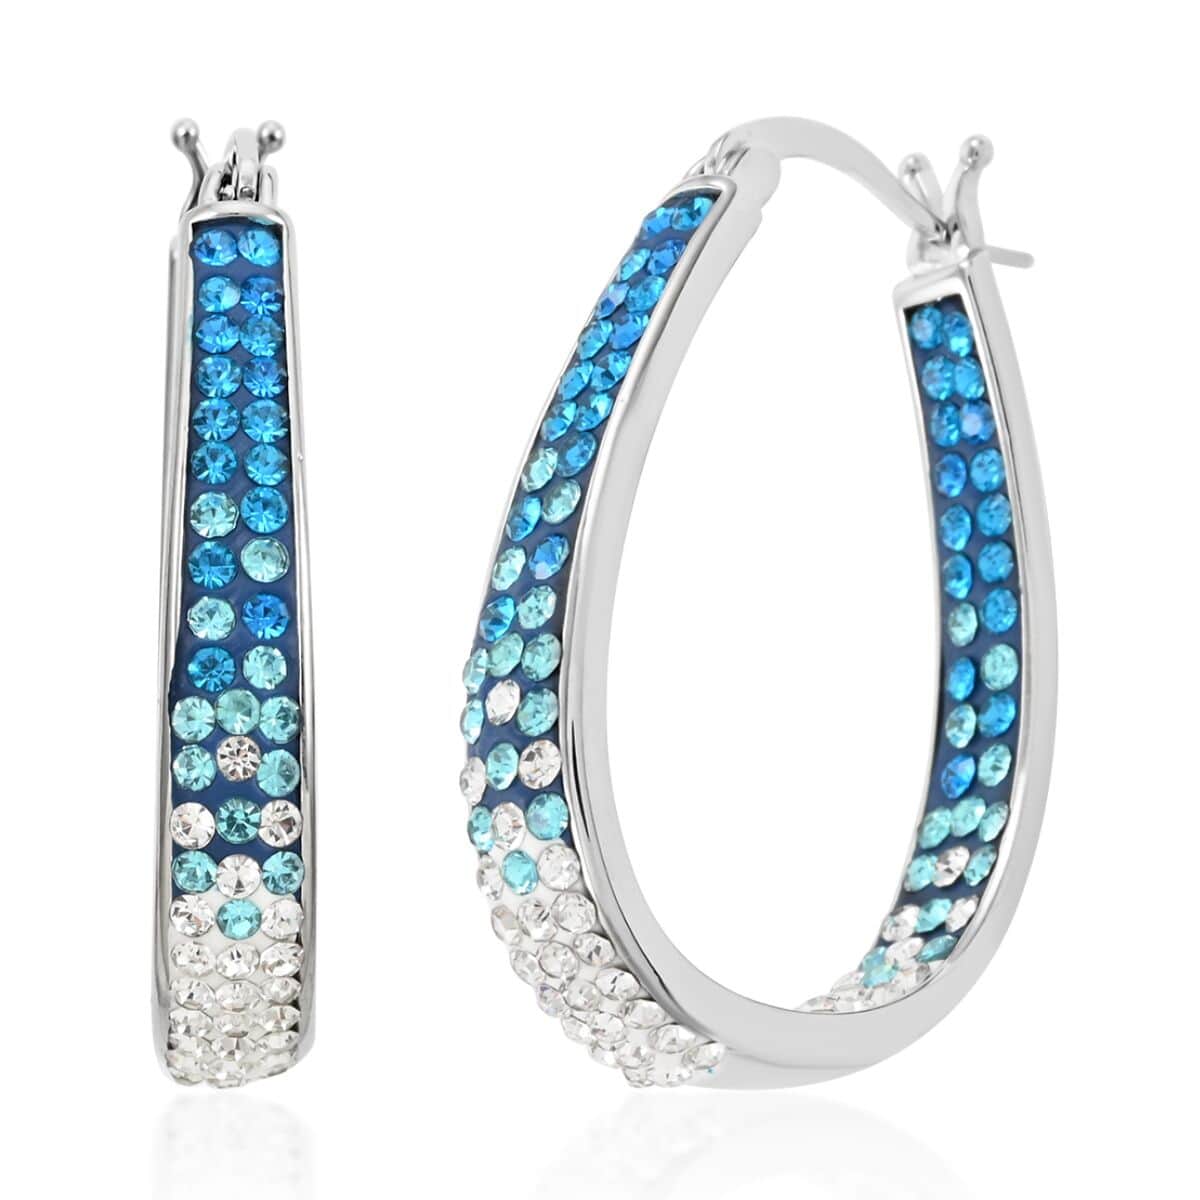 Austrian White Crystal Blue Crystal Earrings in Silvertone, Inside Out Hoops For Women image number 0